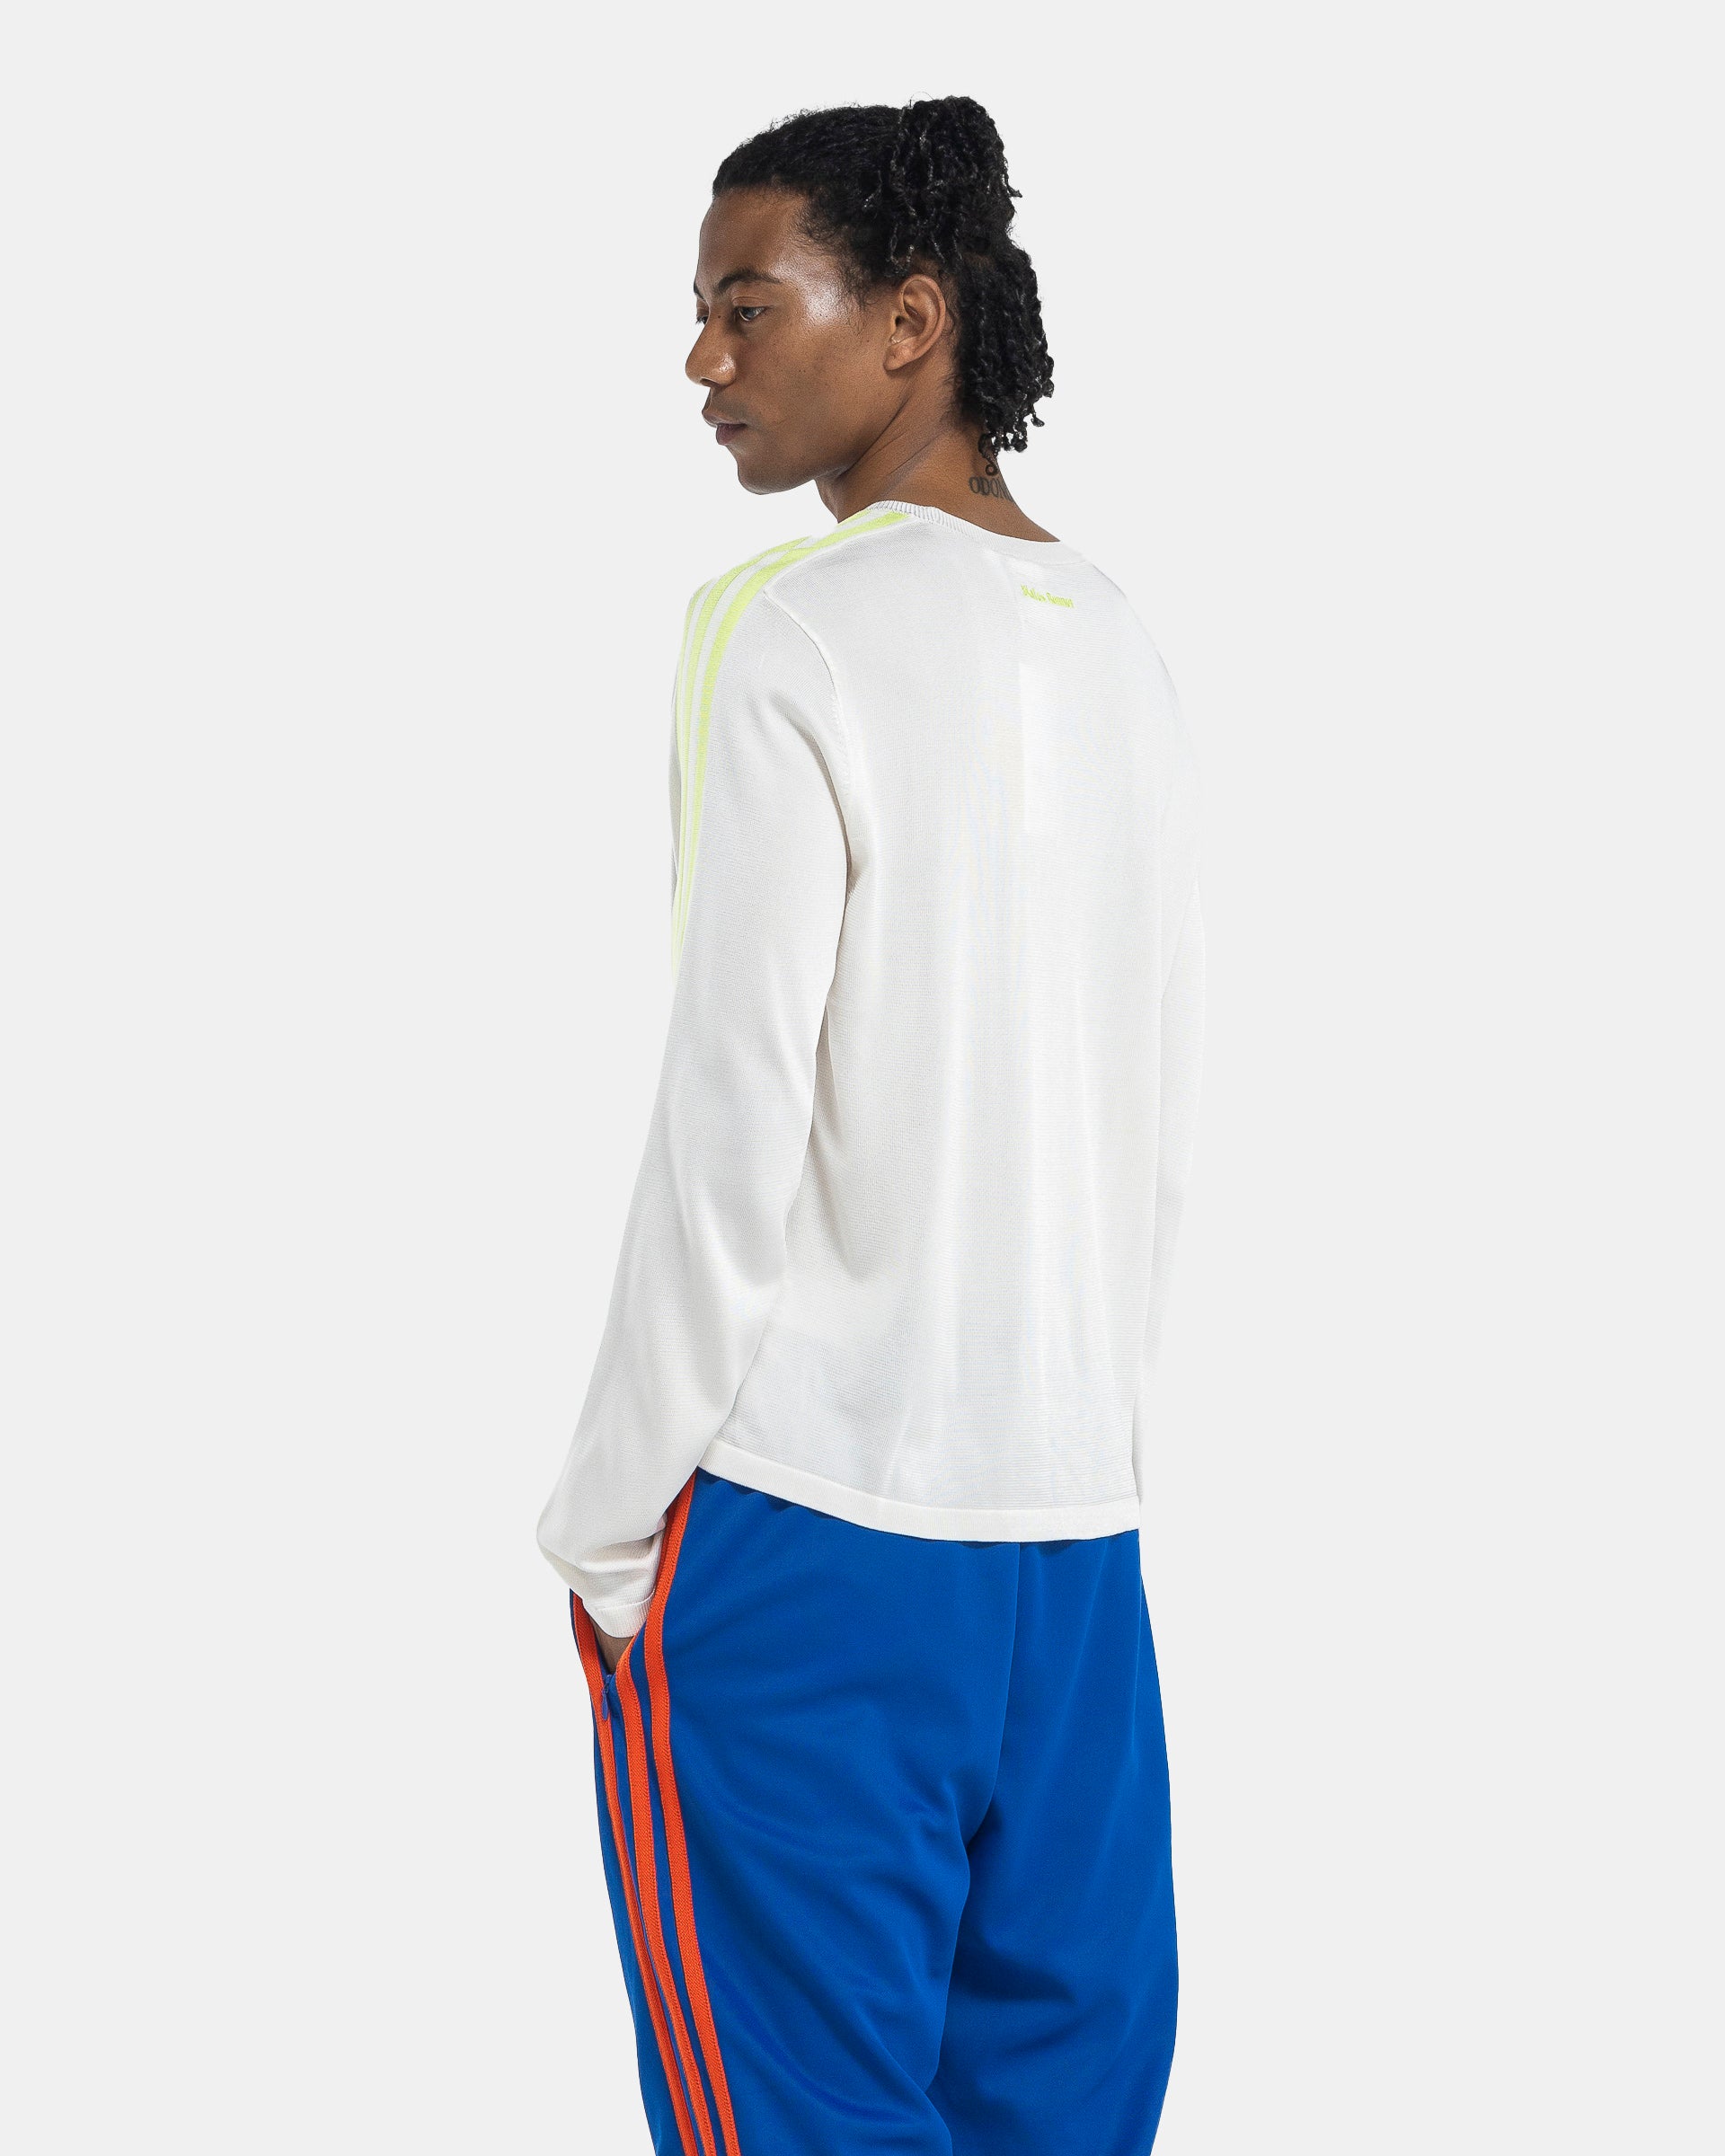 Model wearing Adidas Wales Bonner Knit LST-shirt in Chalk White on the white background